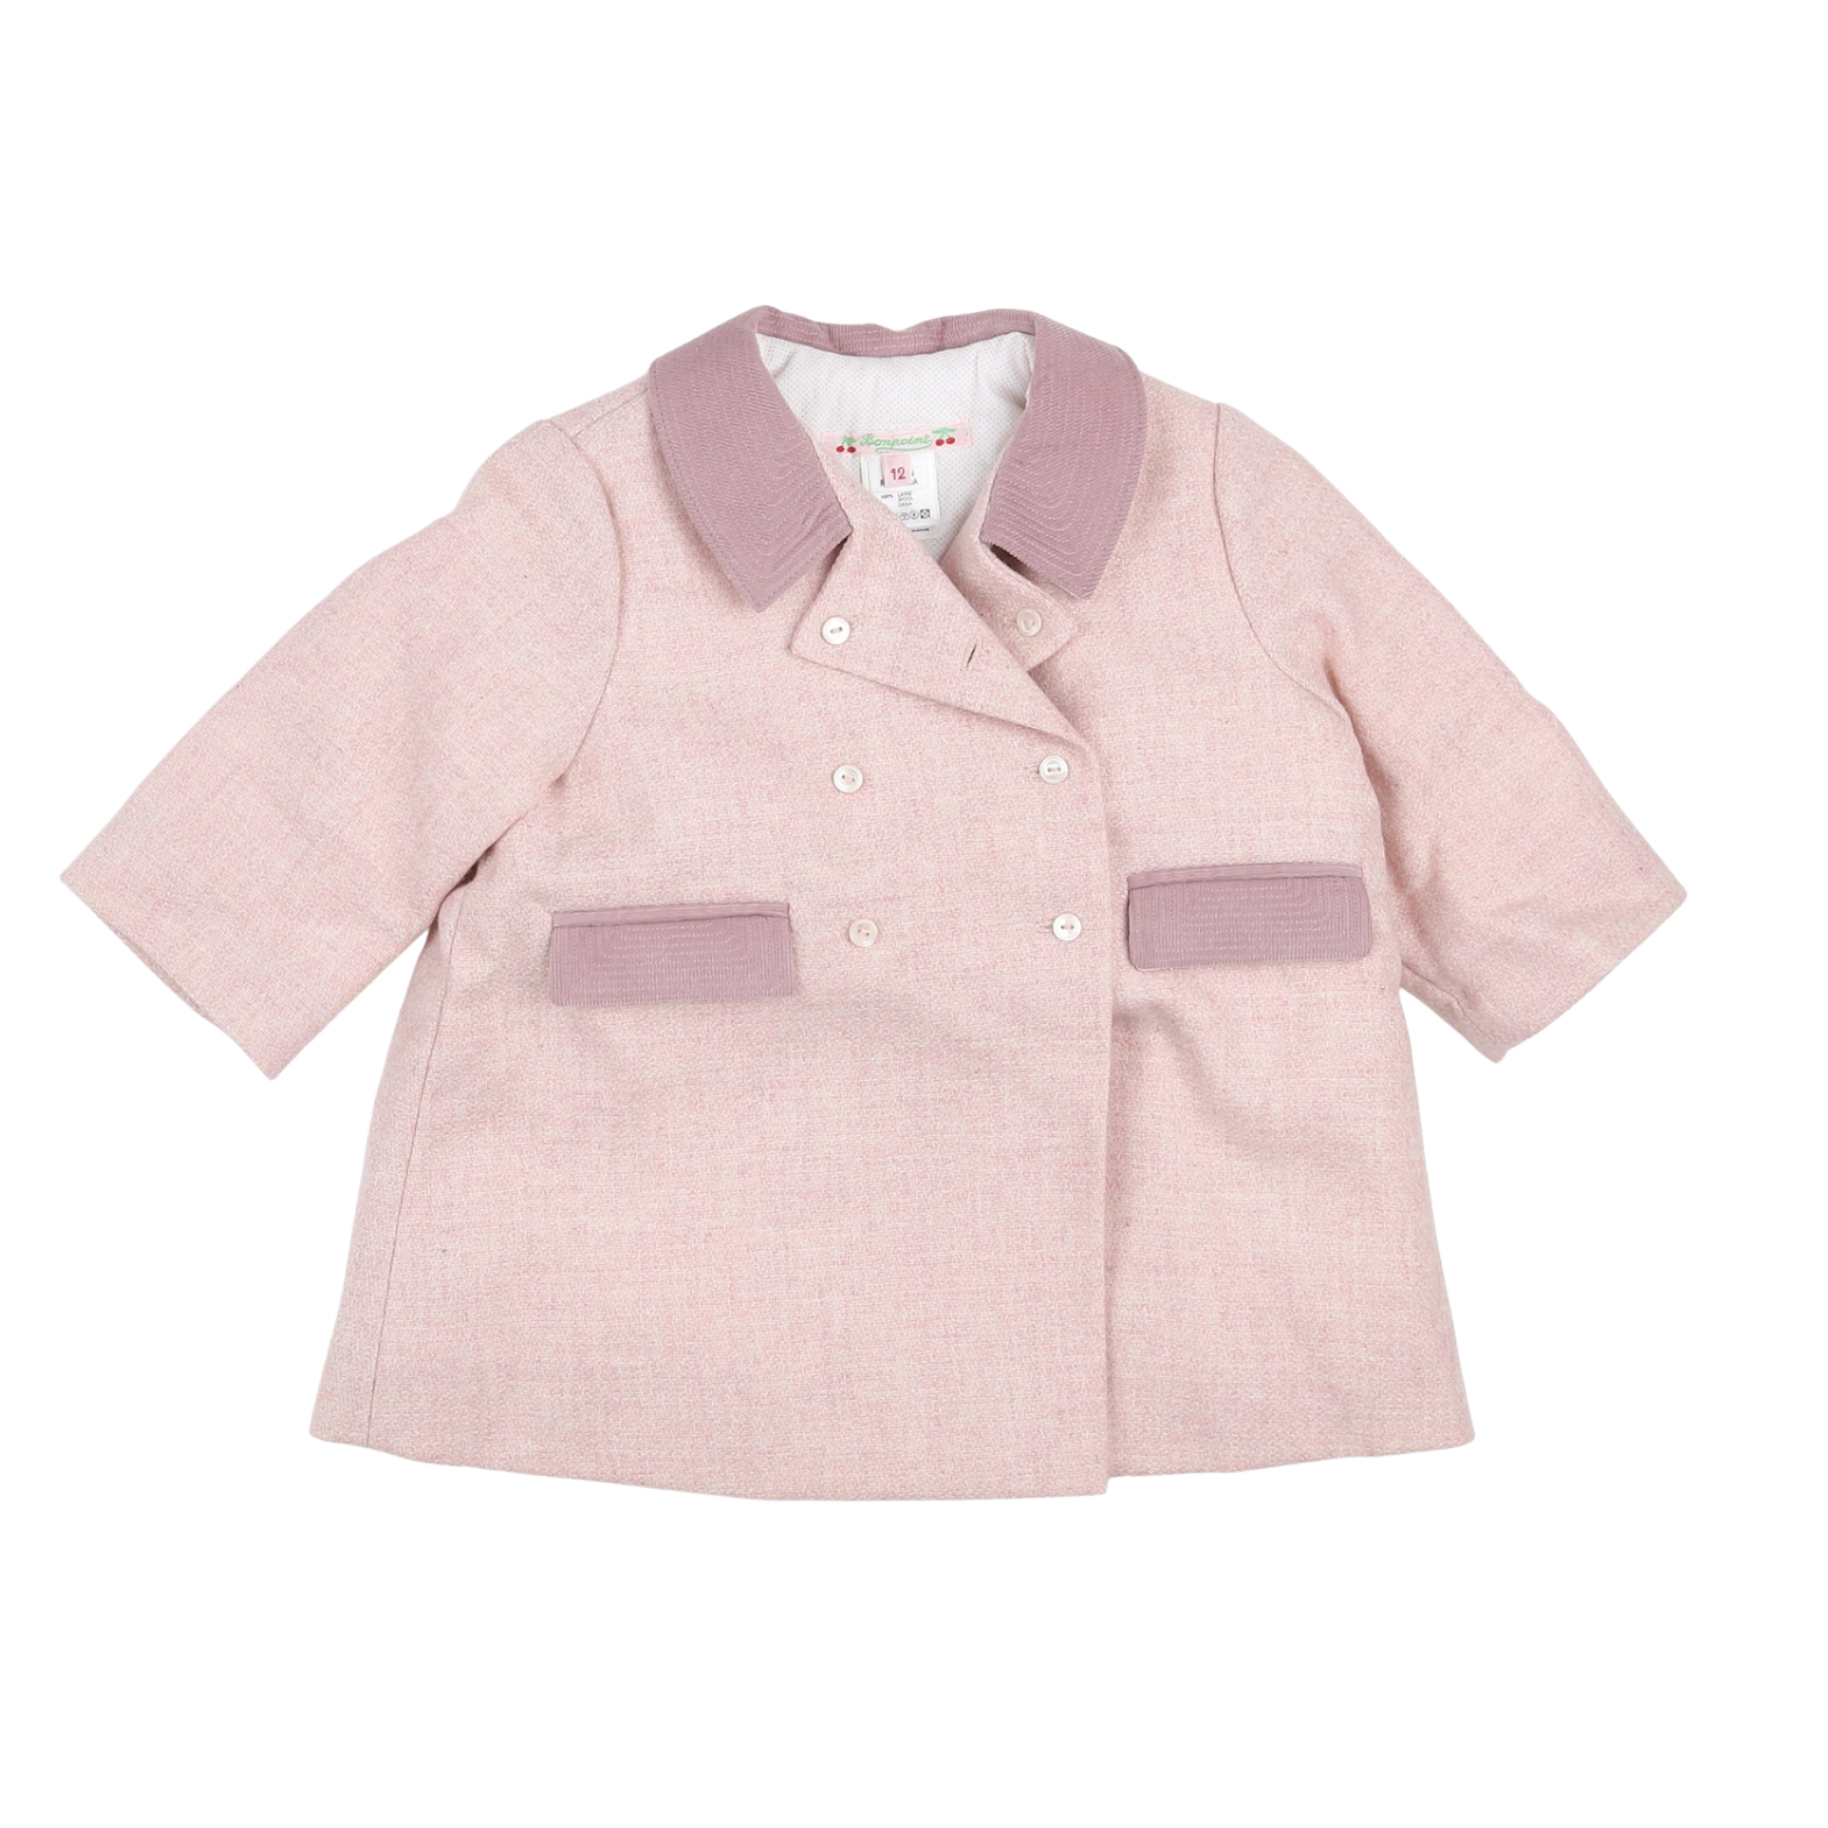 BONPOINT - Pink coat - 1 year old